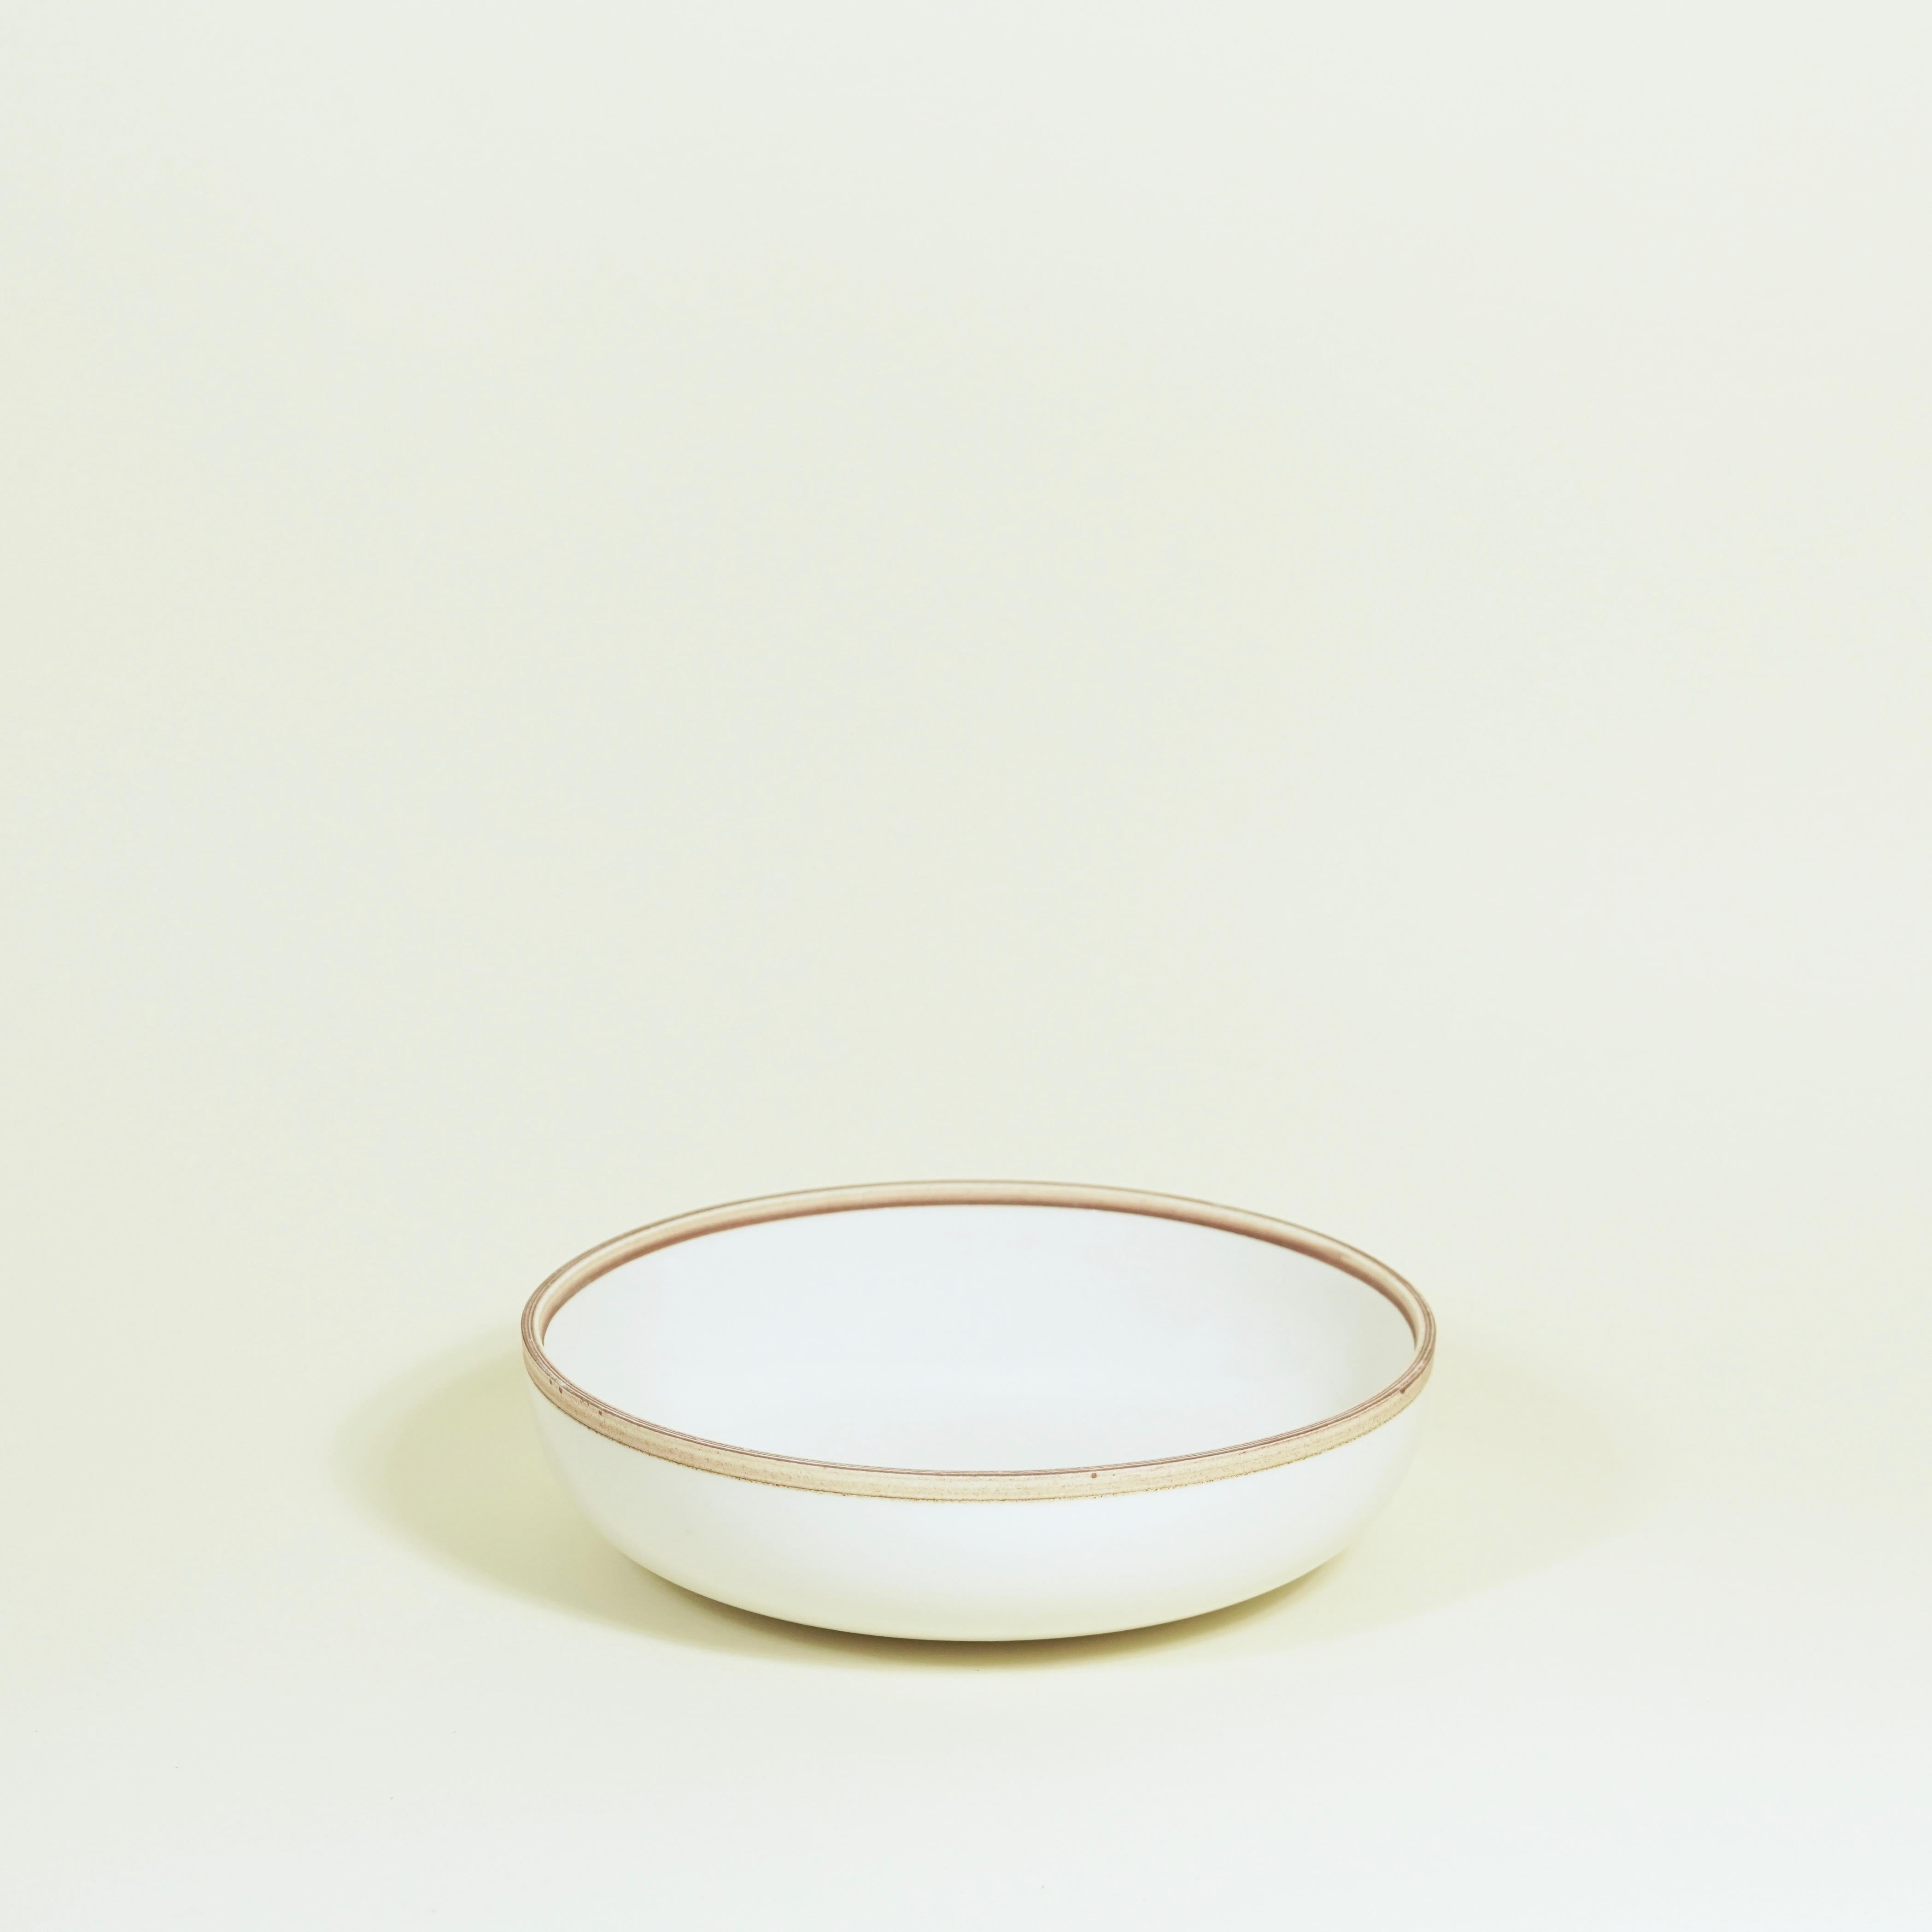 Chinese Small Ivory Glazed Porcelain Hermit Bowl with Rustic Rim